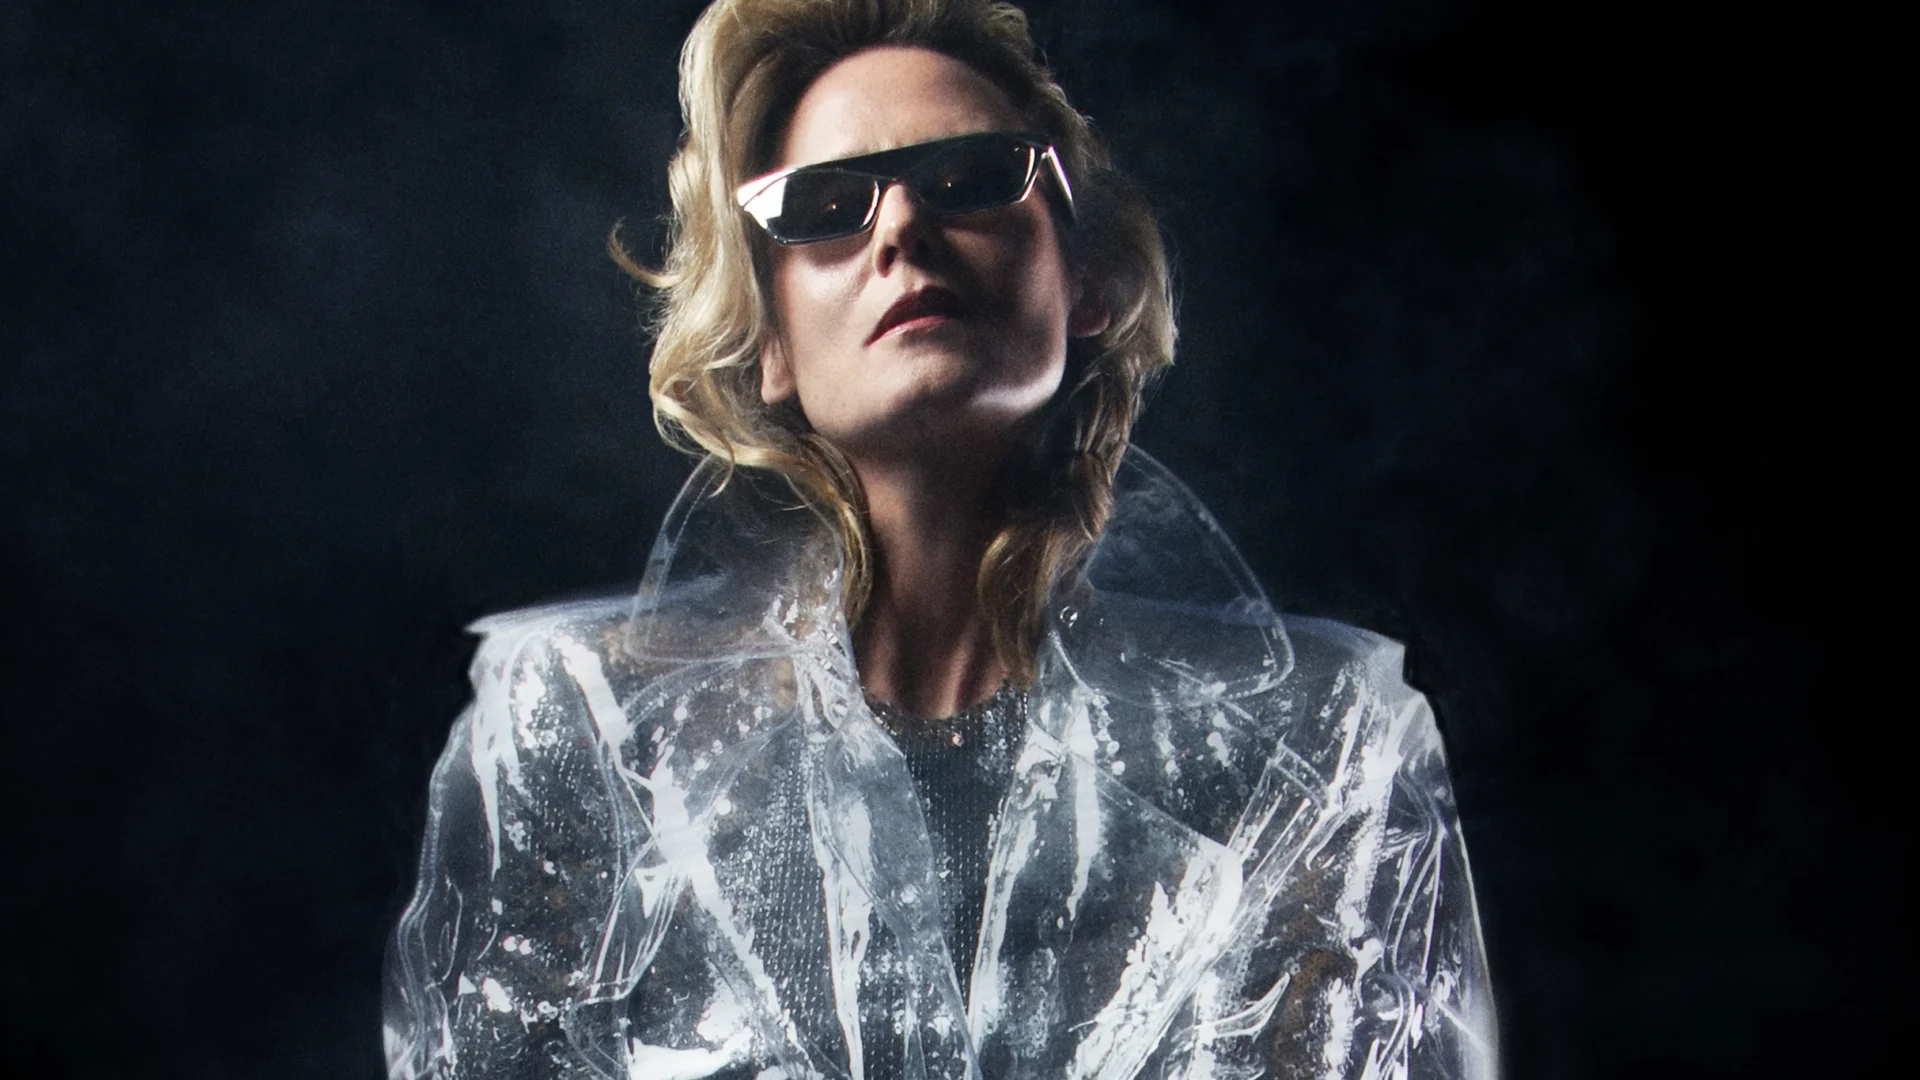 Róisín Murphy Releases Electrifying Track "You Knew"